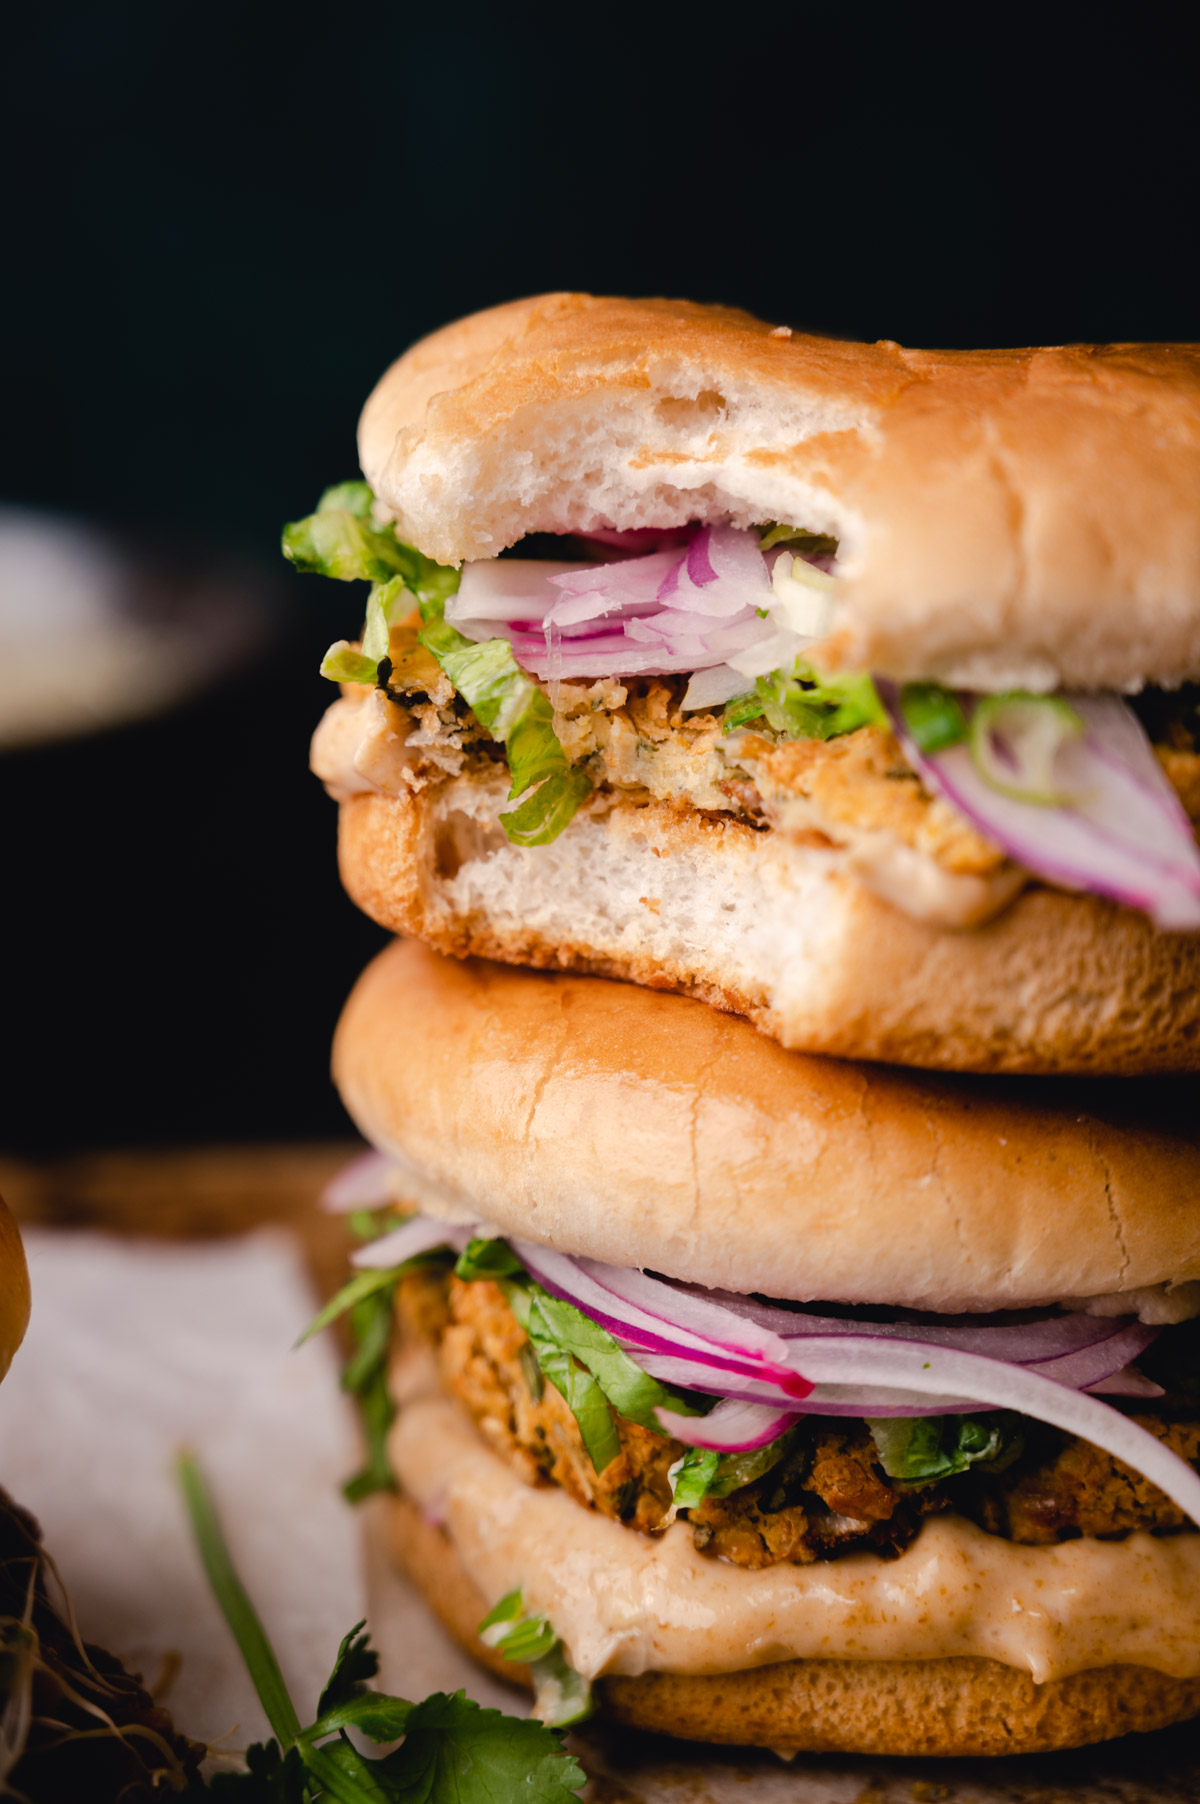 Close-up of a double-layer veggie burger with red onions, lettuce, and sauce on a bun, set against a dark background.